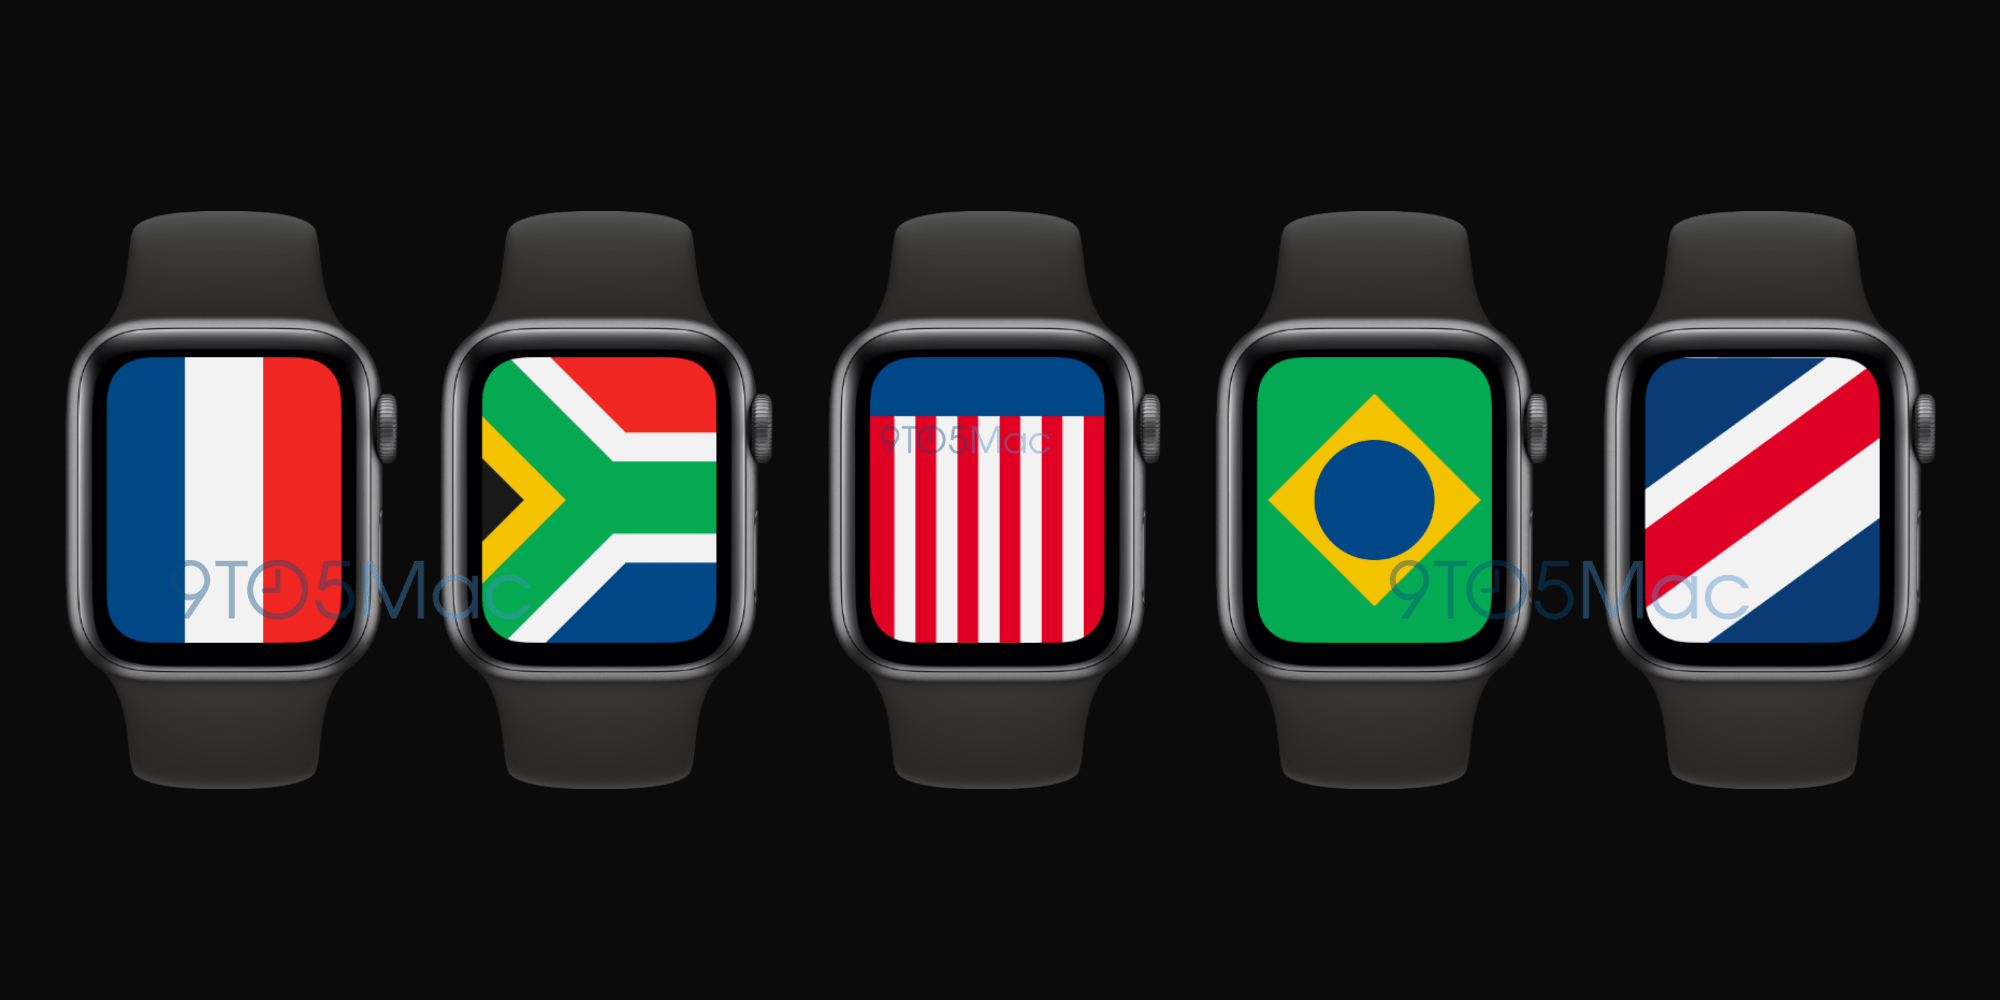 watchOS 7 includes new 'International' watch face showcasing flags from  around the world